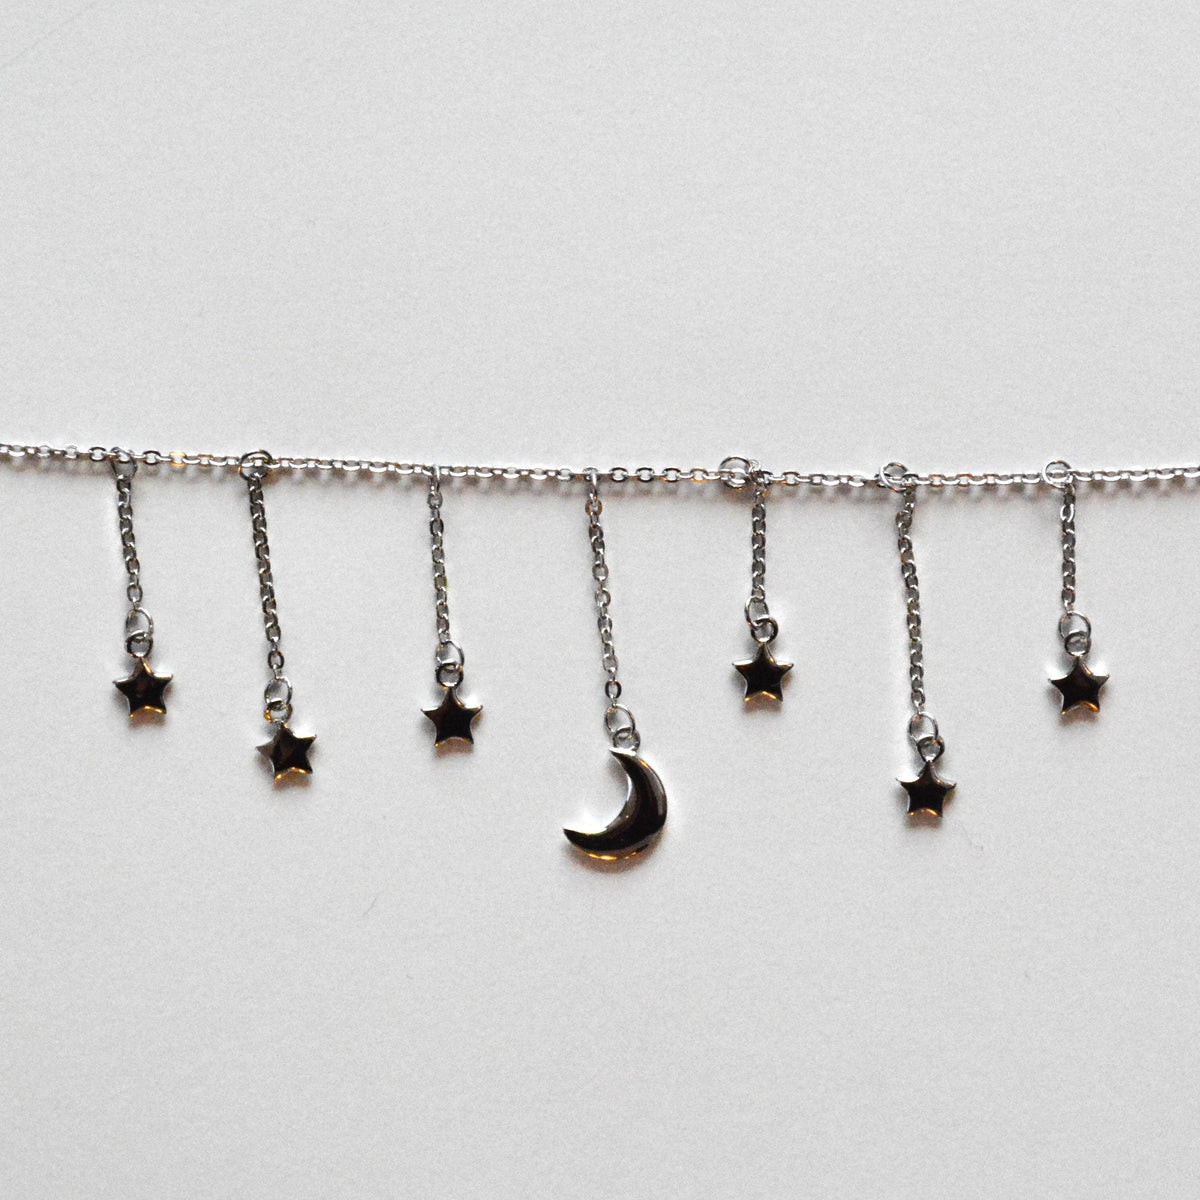 Chic Silver Choker Necklace - Elegant Design with Star & Moon Dangling Charms